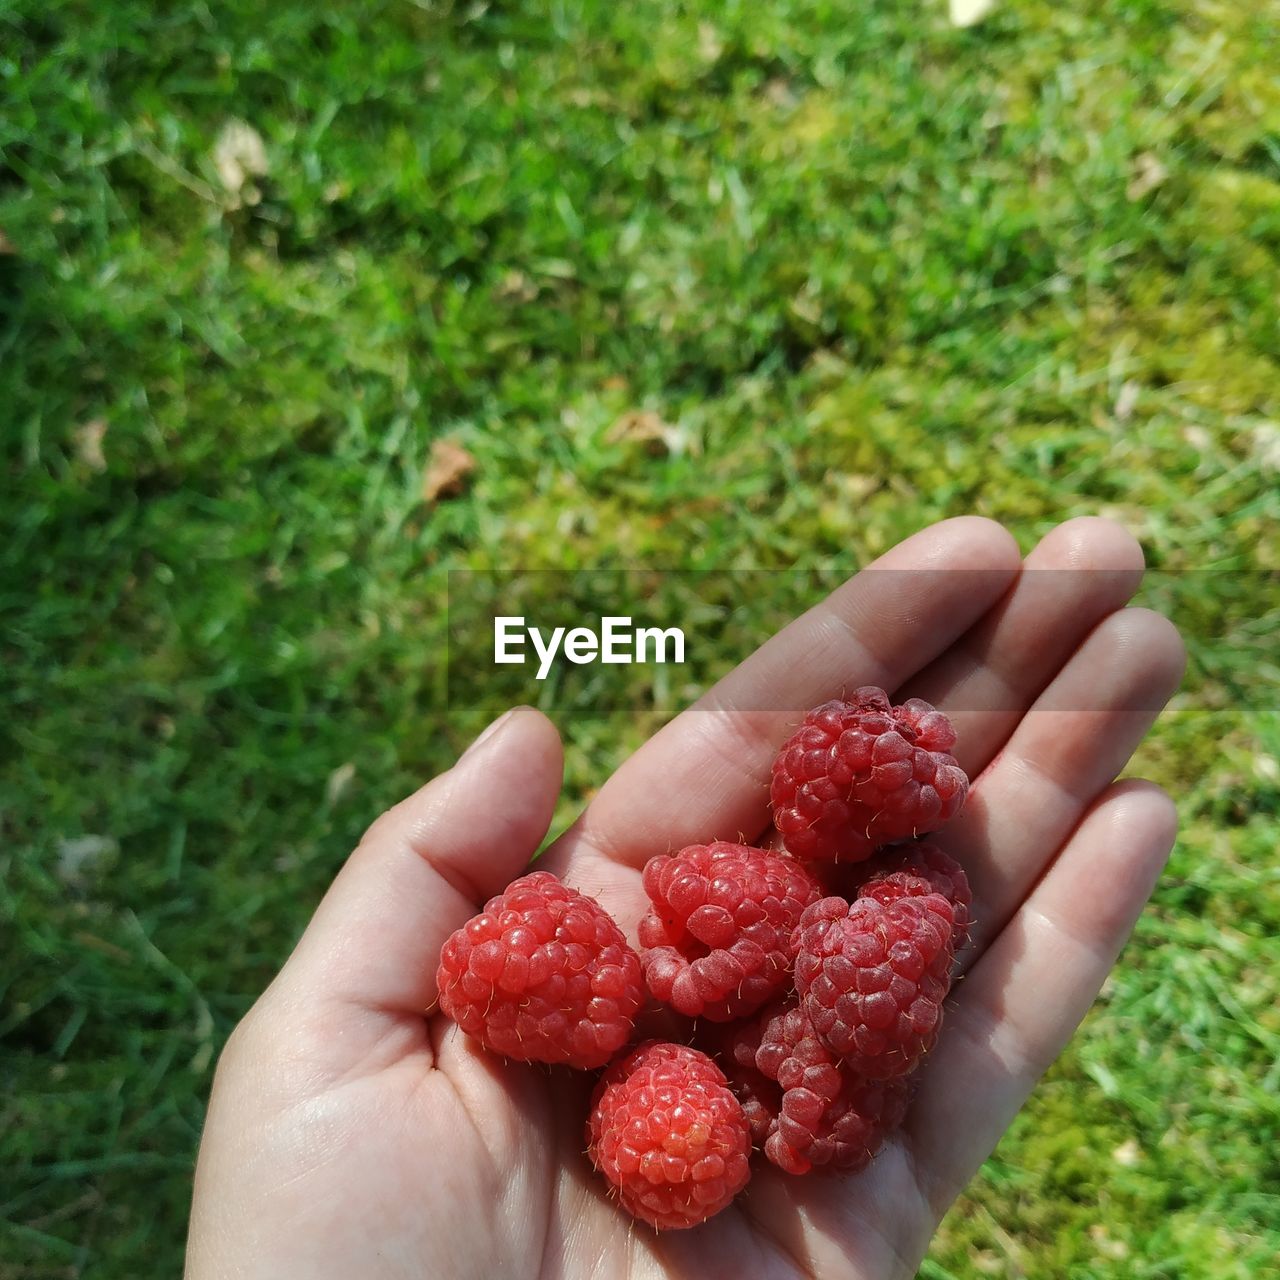 Cropped hand of person holding raspberries